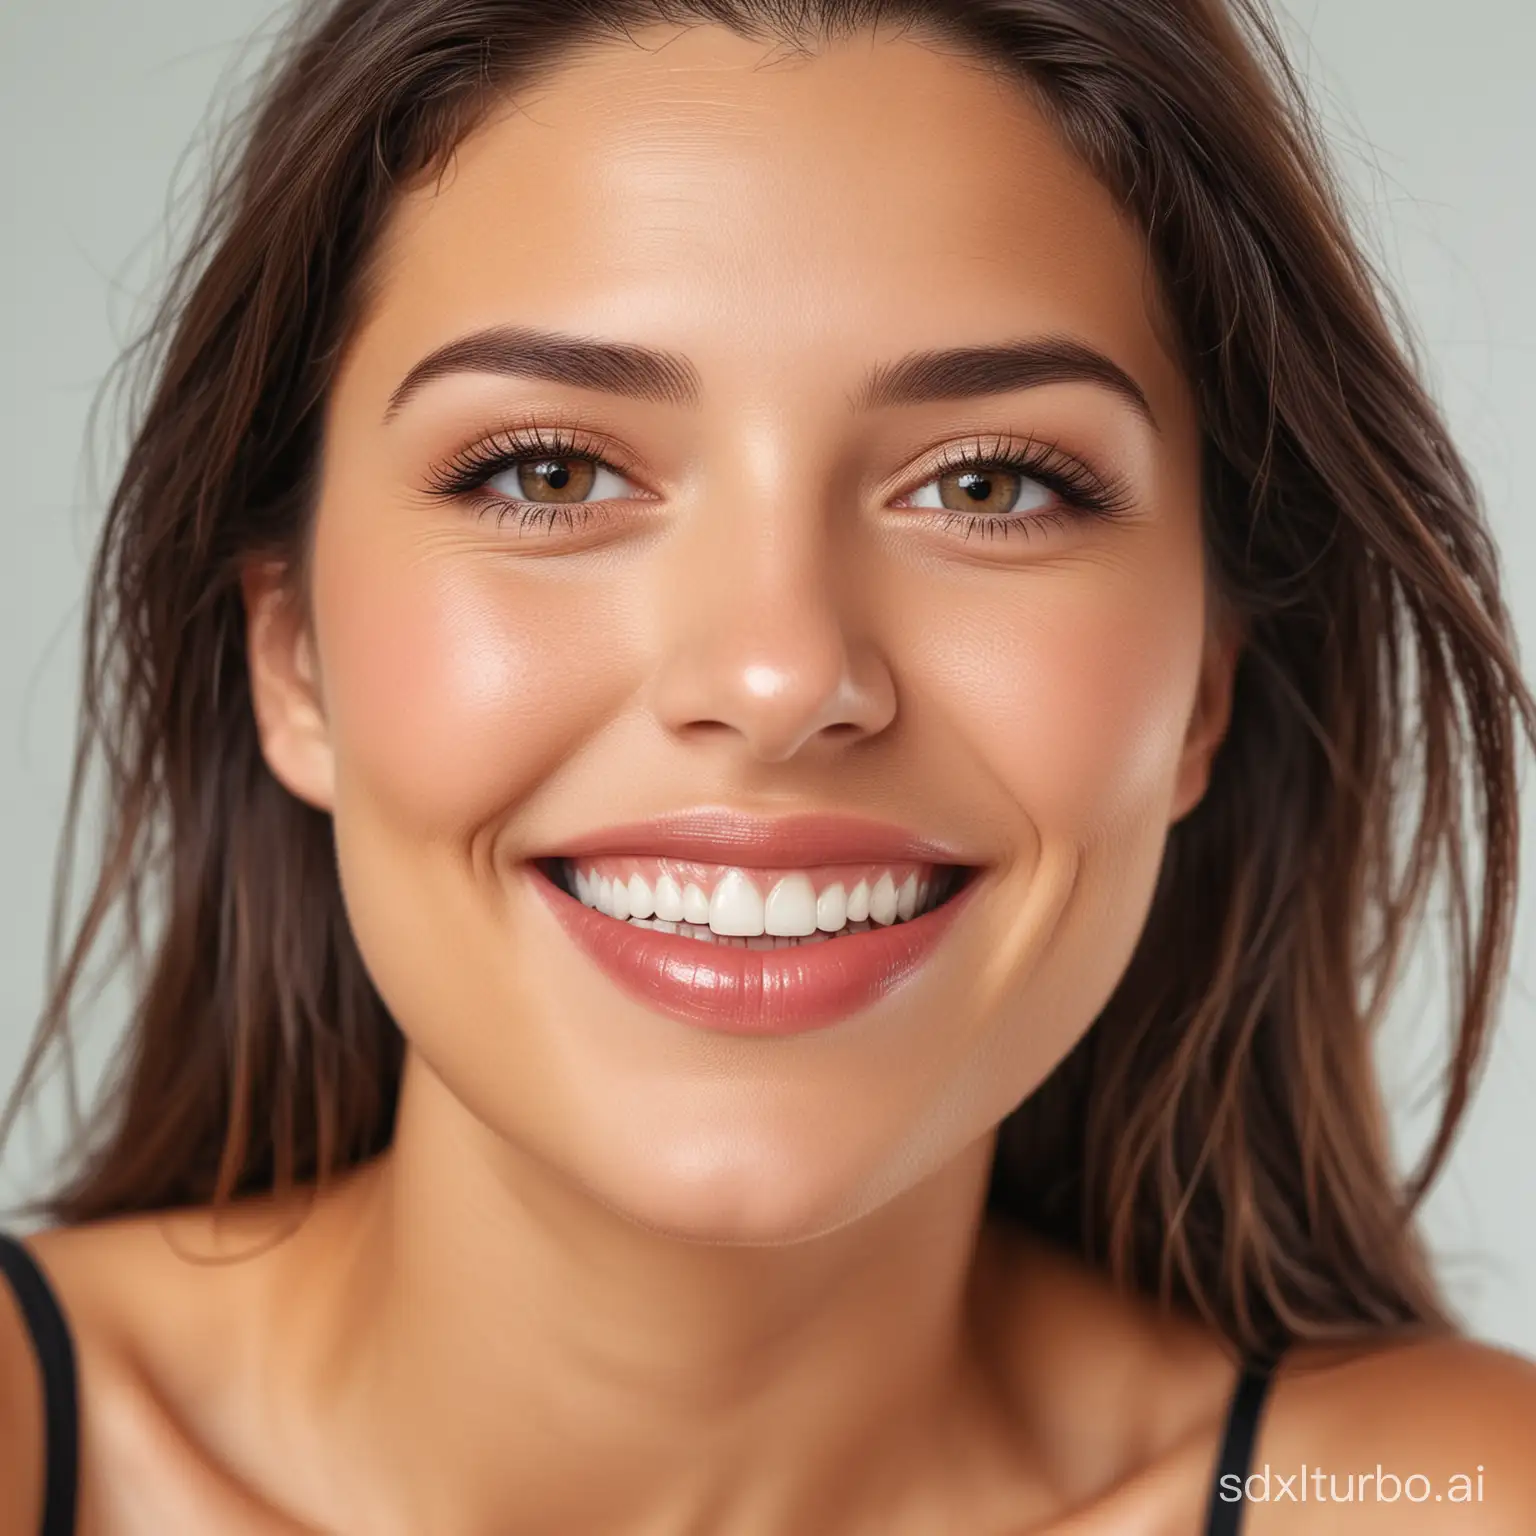 Smiling-Woman-Portrait-in-Natural-Lighting